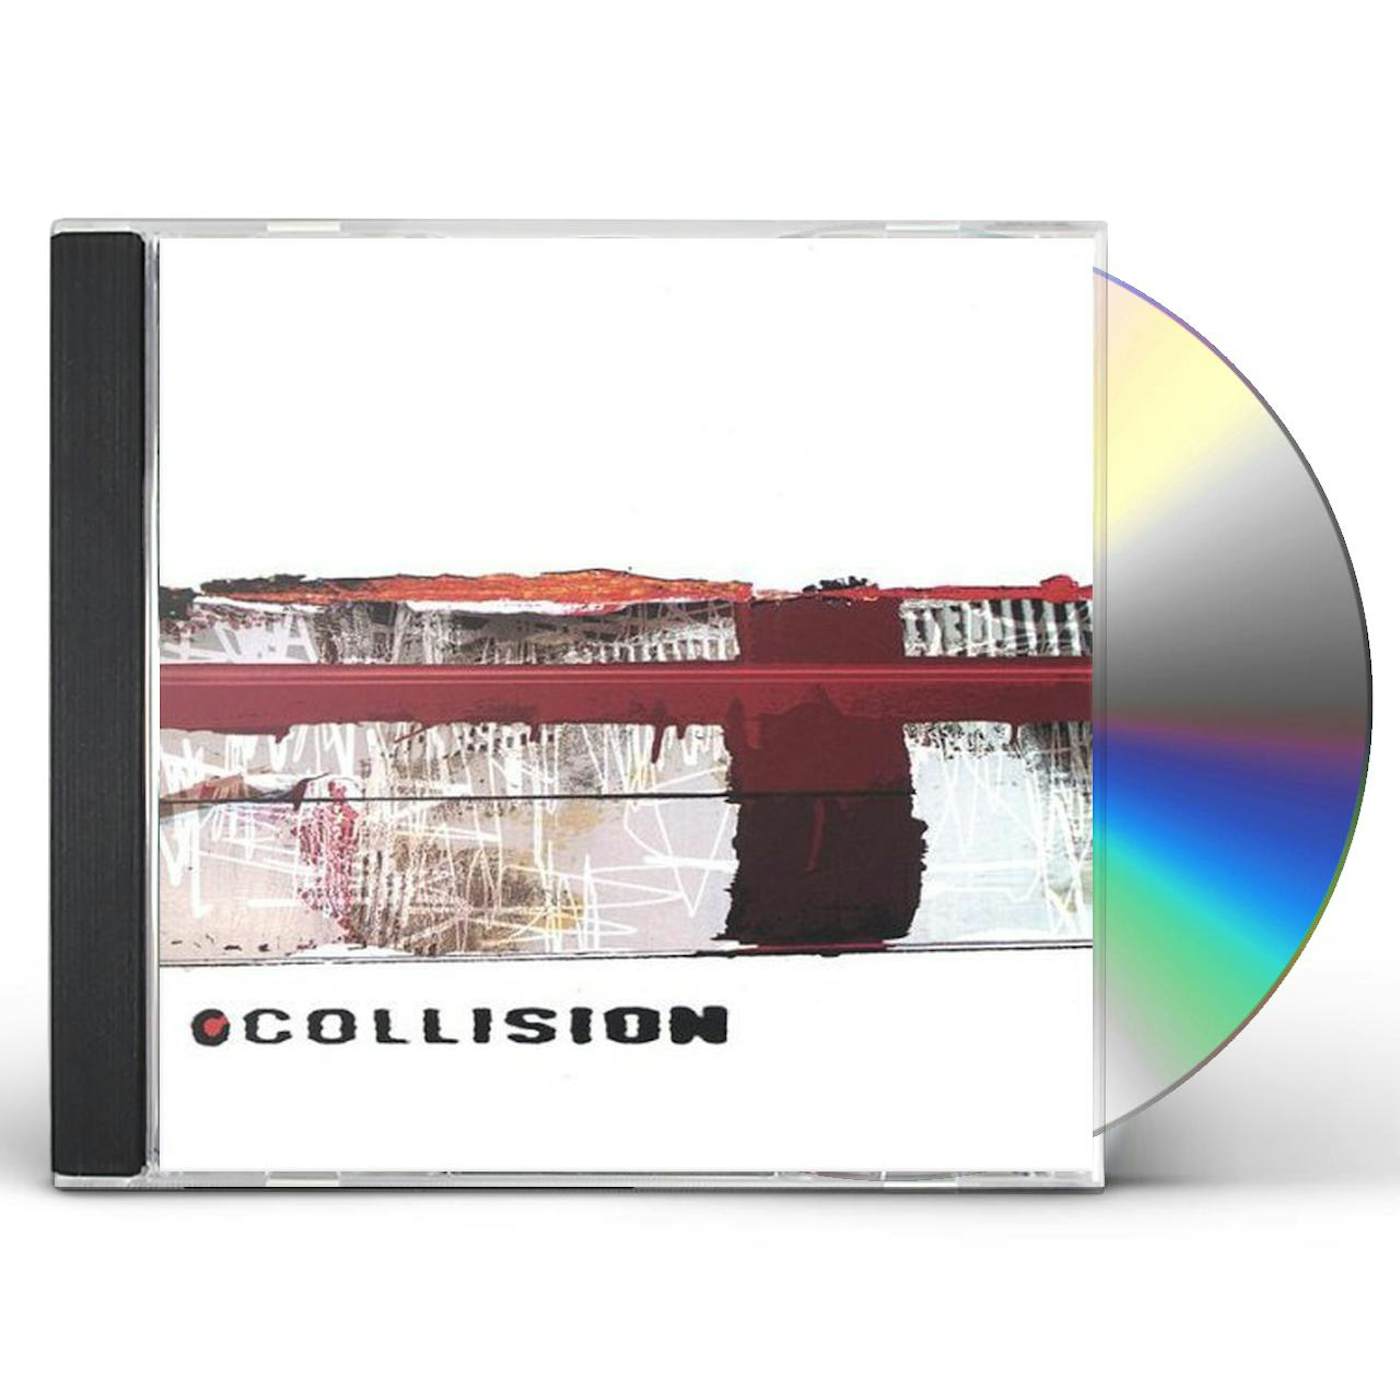 The Collision EP CD